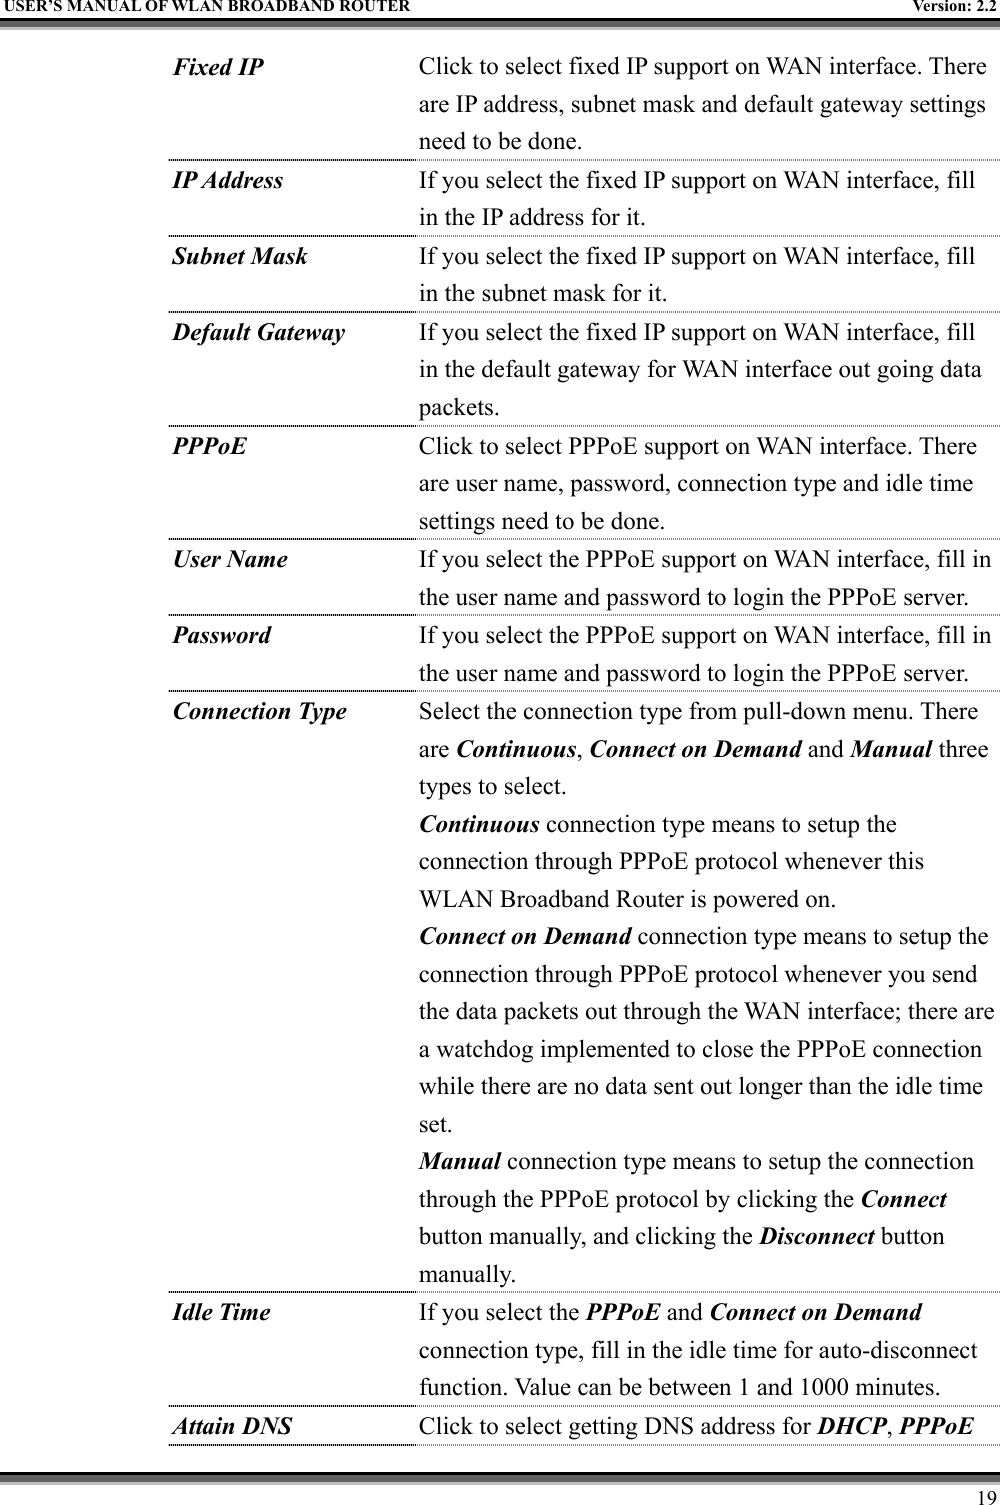   USER’S MANUAL OF WLAN BROADBAND ROUTER    Version: 2.2     19 Fixed IP  Click to select fixed IP support on WAN interface. There are IP address, subnet mask and default gateway settings need to be done. IP Address  If you select the fixed IP support on WAN interface, fill in the IP address for it. Subnet Mask If you select the fixed IP support on WAN interface, fill in the subnet mask for it. Default Gateway If you select the fixed IP support on WAN interface, fill in the default gateway for WAN interface out going data packets. PPPoE  Click to select PPPoE support on WAN interface. There are user name, password, connection type and idle time settings need to be done. User Name  If you select the PPPoE support on WAN interface, fill in the user name and password to login the PPPoE server. Password  If you select the PPPoE support on WAN interface, fill in the user name and password to login the PPPoE server. Connection Type  Select the connection type from pull-down menu. There are Continuous, Connect on Demand and Manual three types to select. Continuous connection type means to setup the connection through PPPoE protocol whenever this WLAN Broadband Router is powered on. Connect on Demand connection type means to setup the connection through PPPoE protocol whenever you send the data packets out through the WAN interface; there are a watchdog implemented to close the PPPoE connection while there are no data sent out longer than the idle time set. Manual connection type means to setup the connection through the PPPoE protocol by clicking the Connect button manually, and clicking the Disconnect button manually. Idle Time If you select the PPPoE and Connect on Demand connection type, fill in the idle time for auto-disconnect function. Value can be between 1 and 1000 minutes. Attain DNS  Click to select getting DNS address for DHCP, PPPoE 